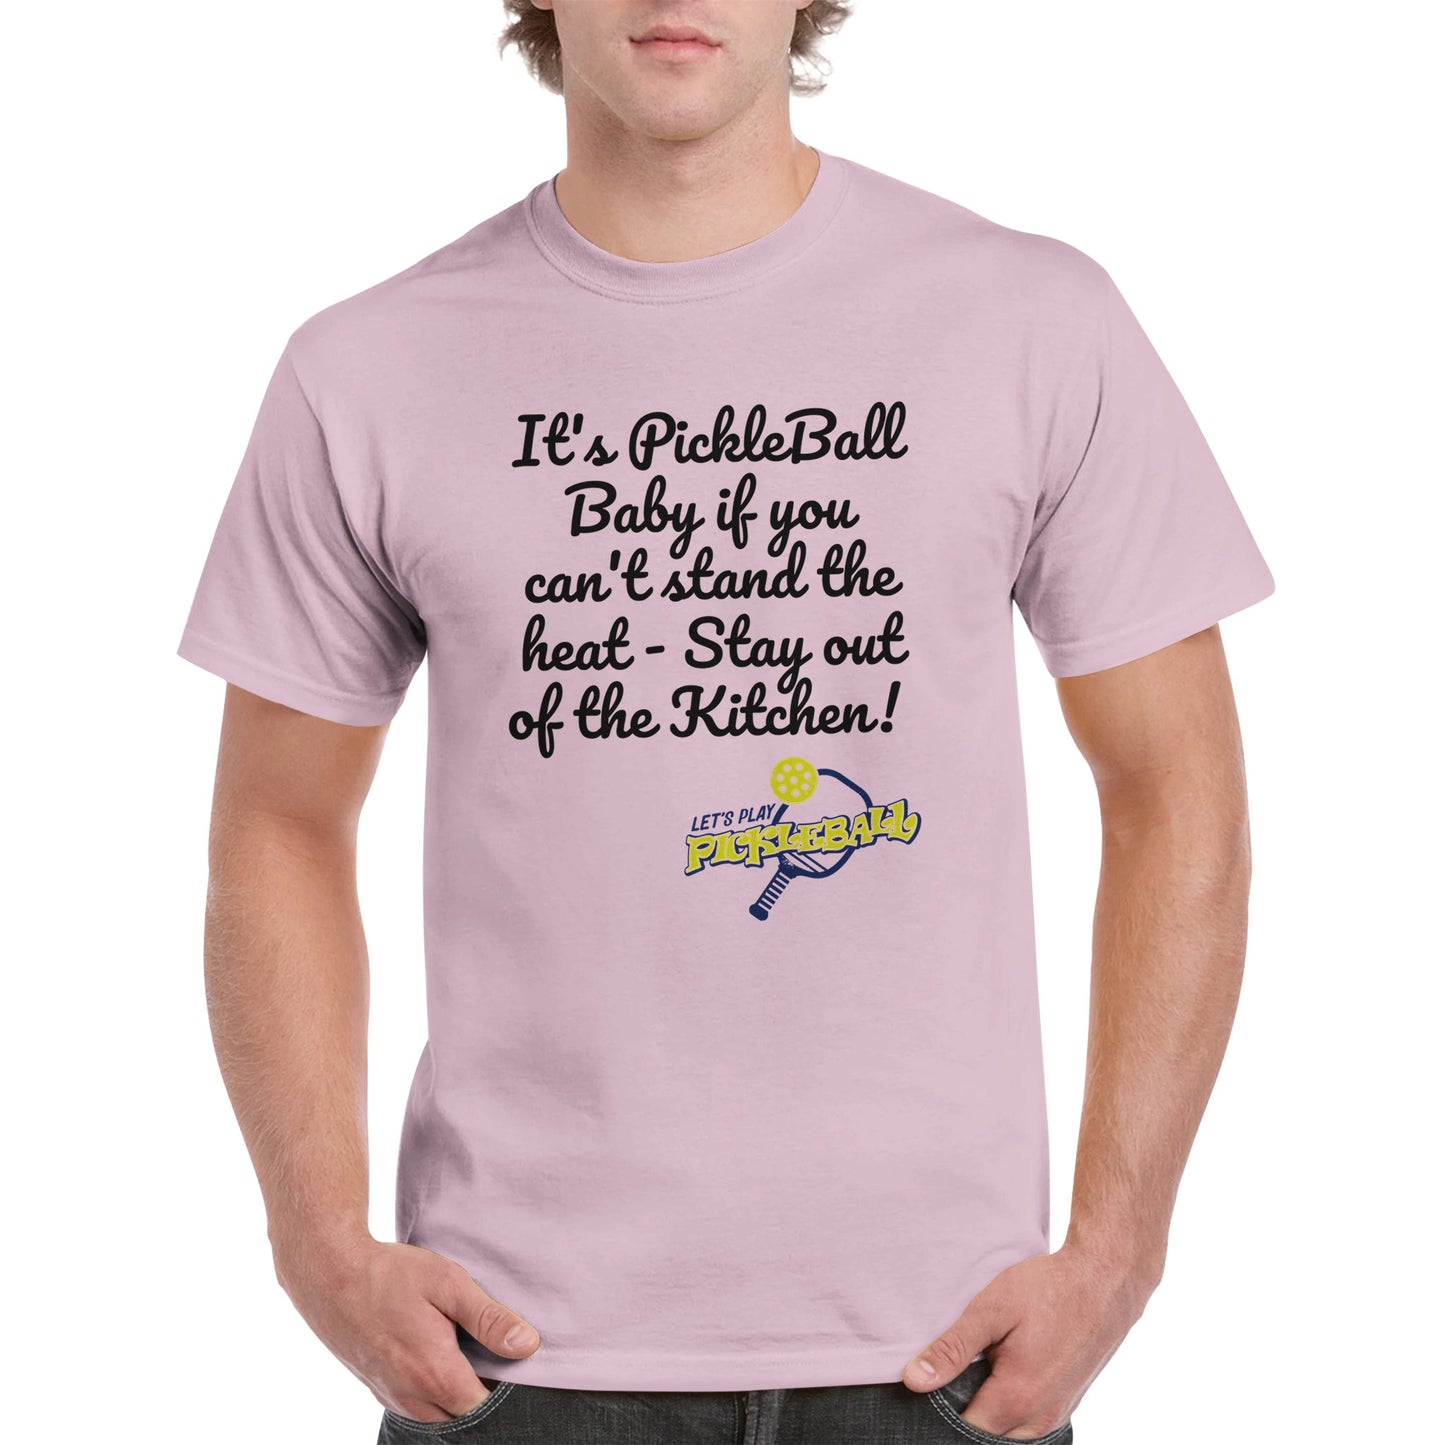 Light pink comfortable Unisex Crewneck heavyweight cotton t-shirt with funny saying It’s PickleBall Baby if can’t stand the heat – Stay out of the Kitchen!  and Let’s Play Pickleball logo on the front from WhatYa Say Apparel worn by blonde-haired male front view.